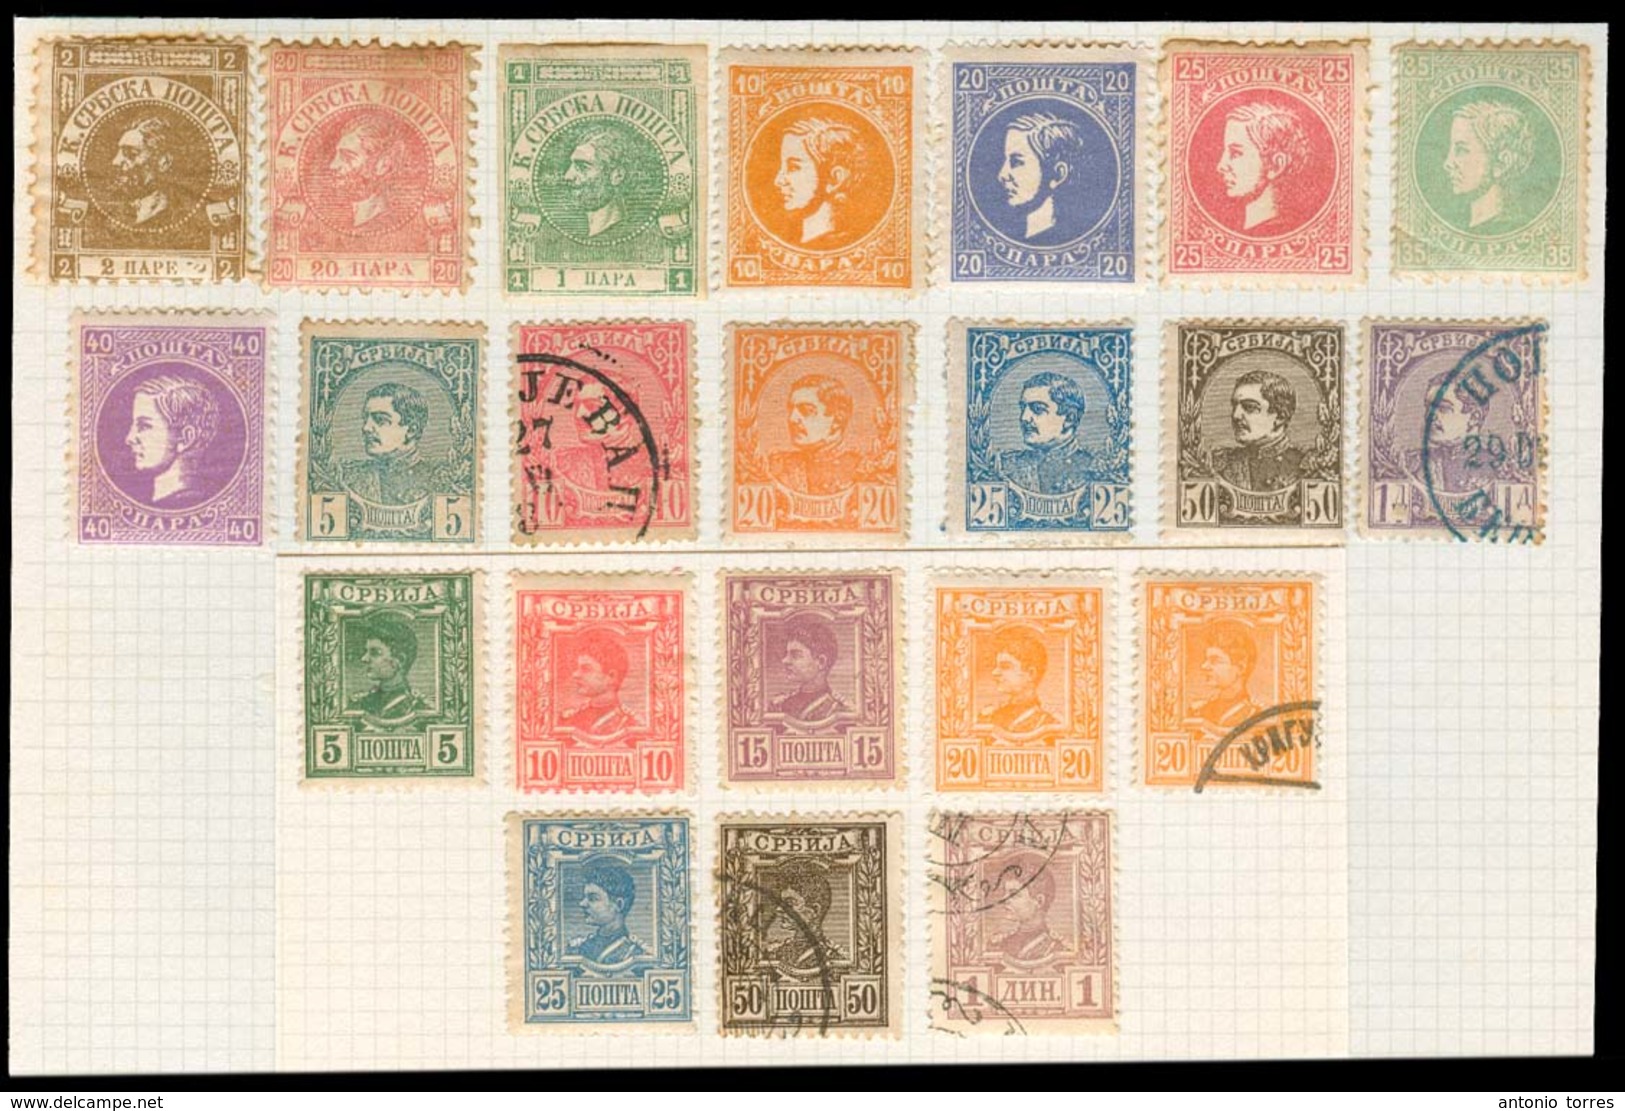 SERBIA. 1866-1900. Original Coll. Remainder / One Album Page. 22 Stamps. Mostly F-VF. - Serbie